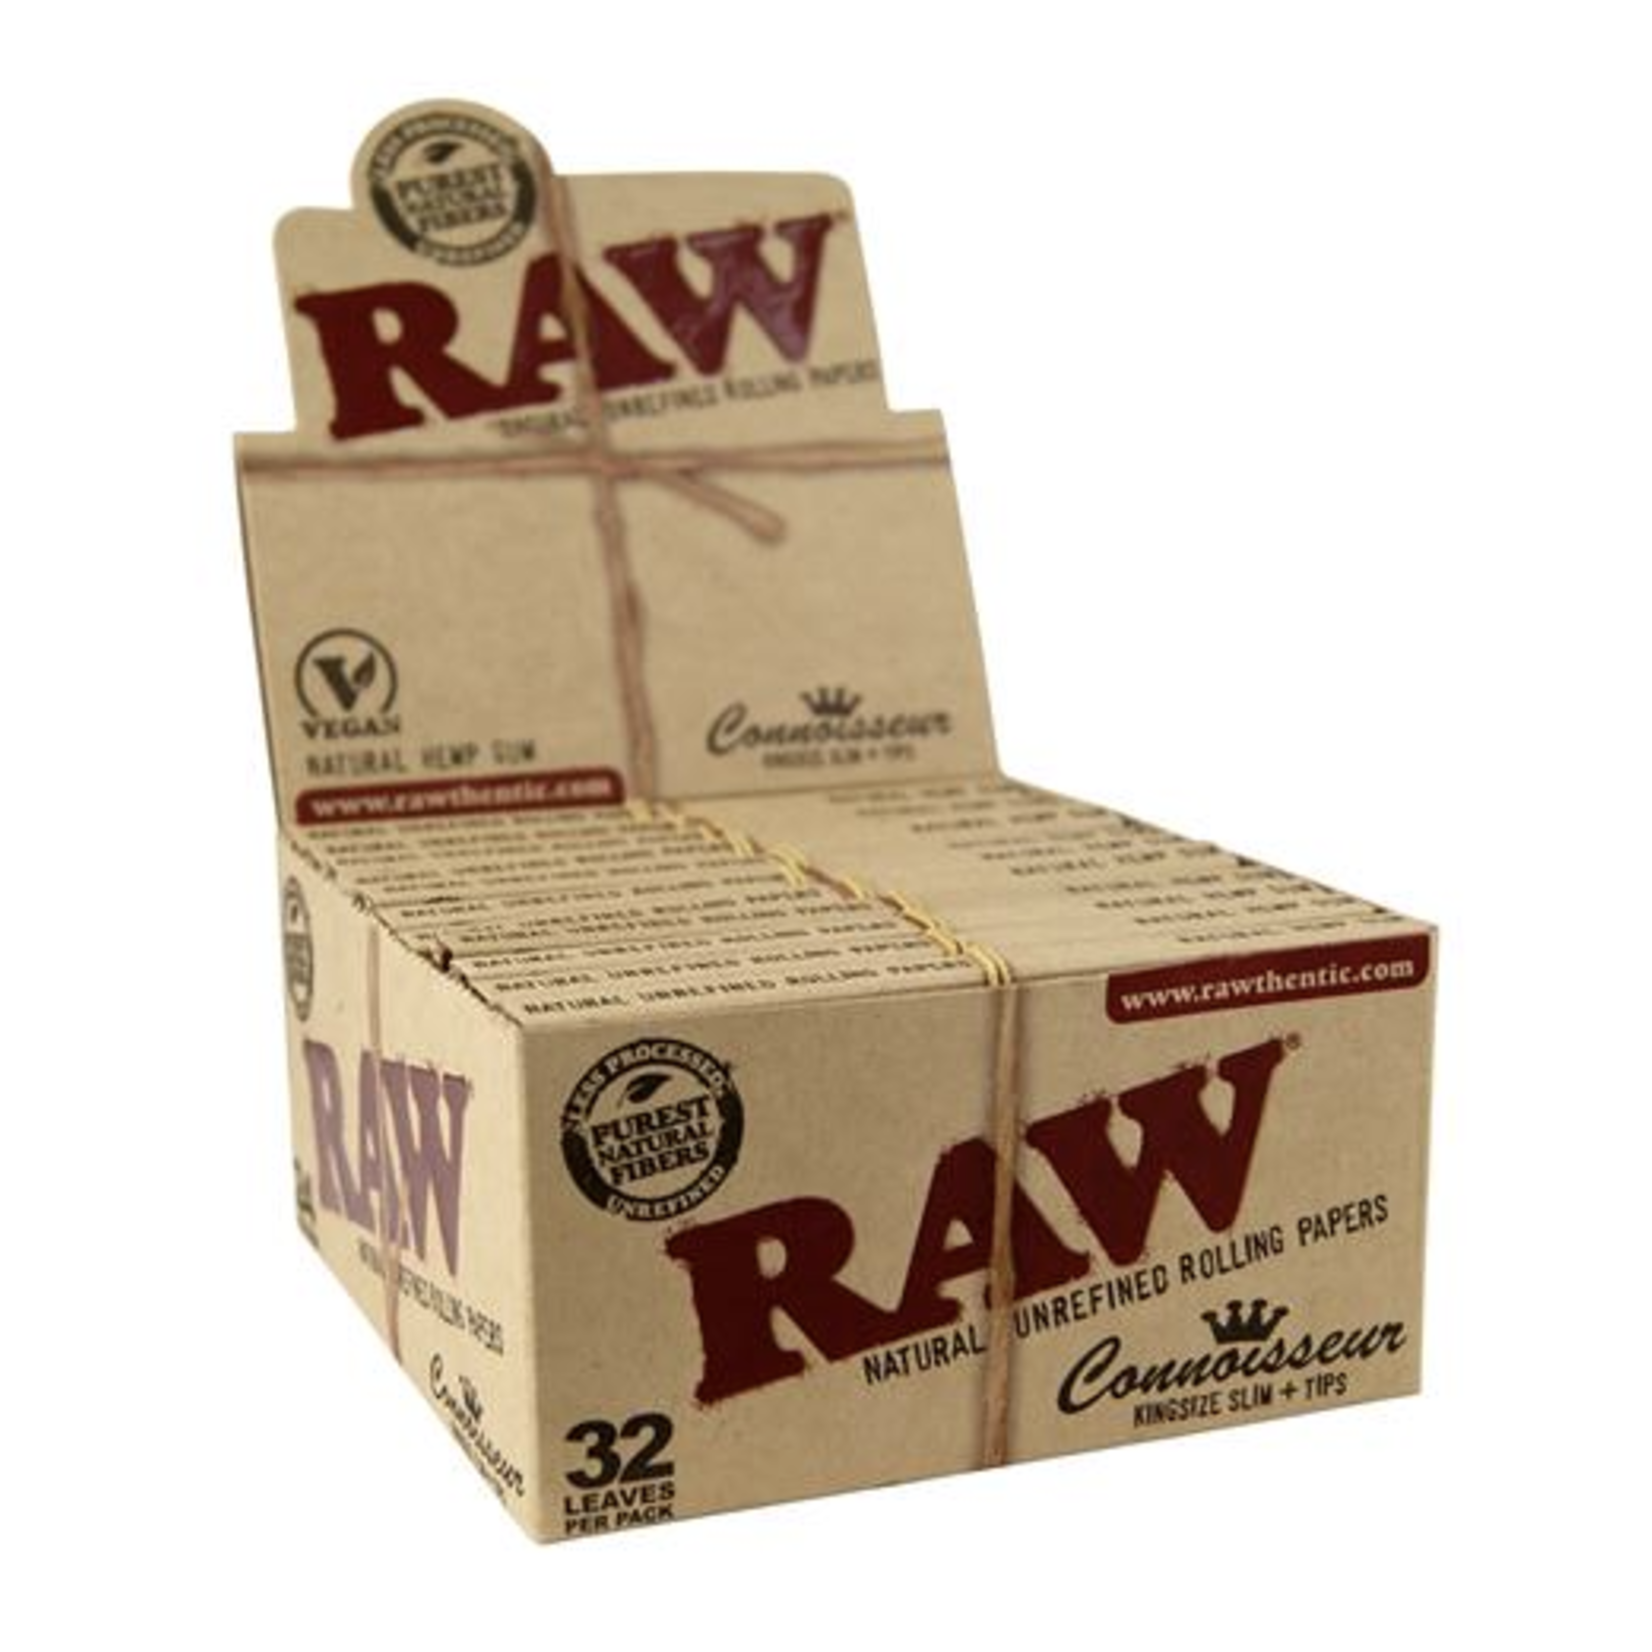 RAW RAW "Rolling Papers + Tips" - Natural